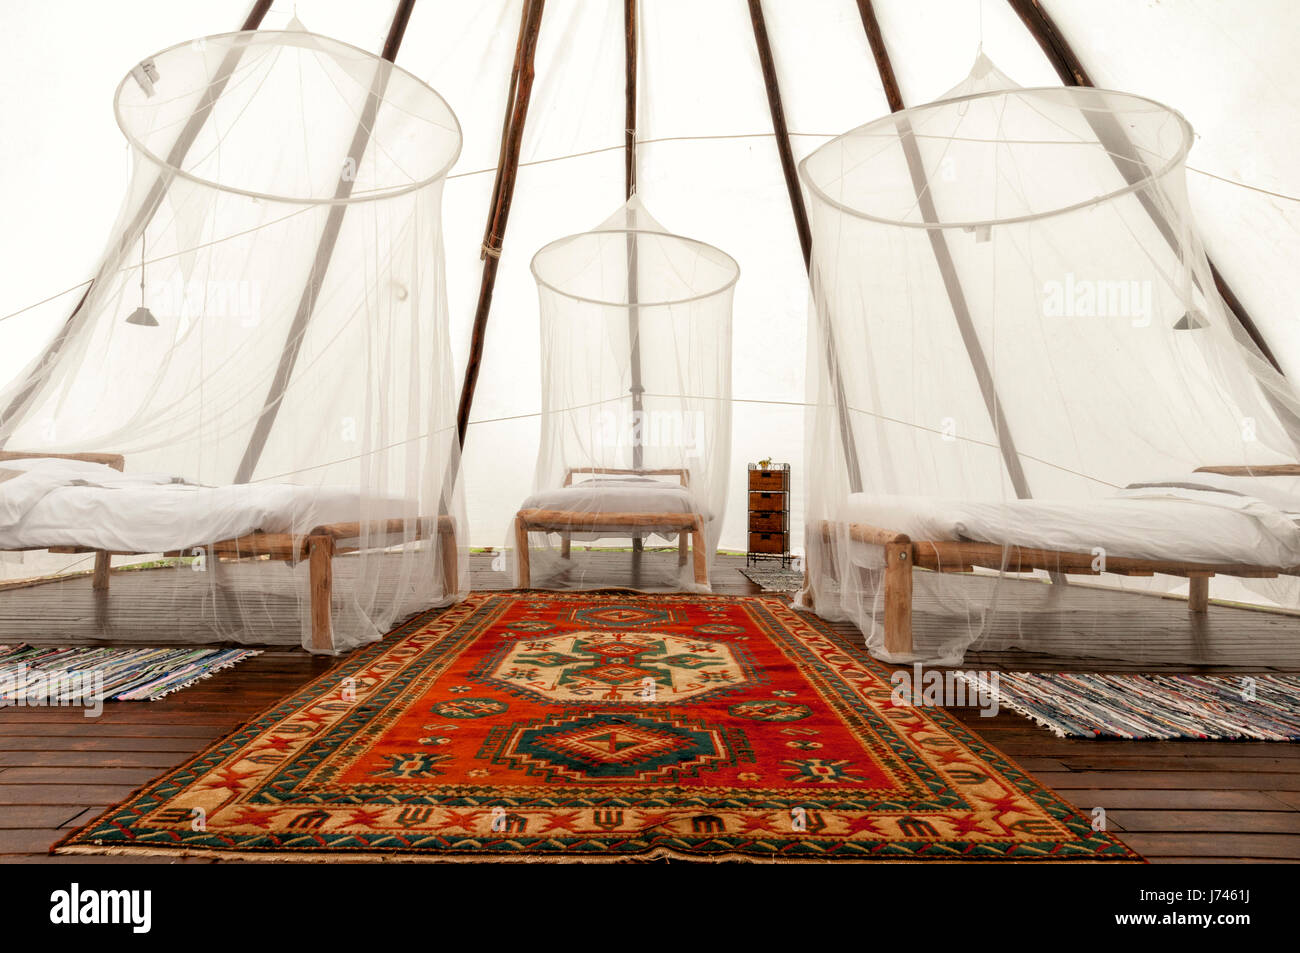 large tipi with three beds, glamping. Stock Photo